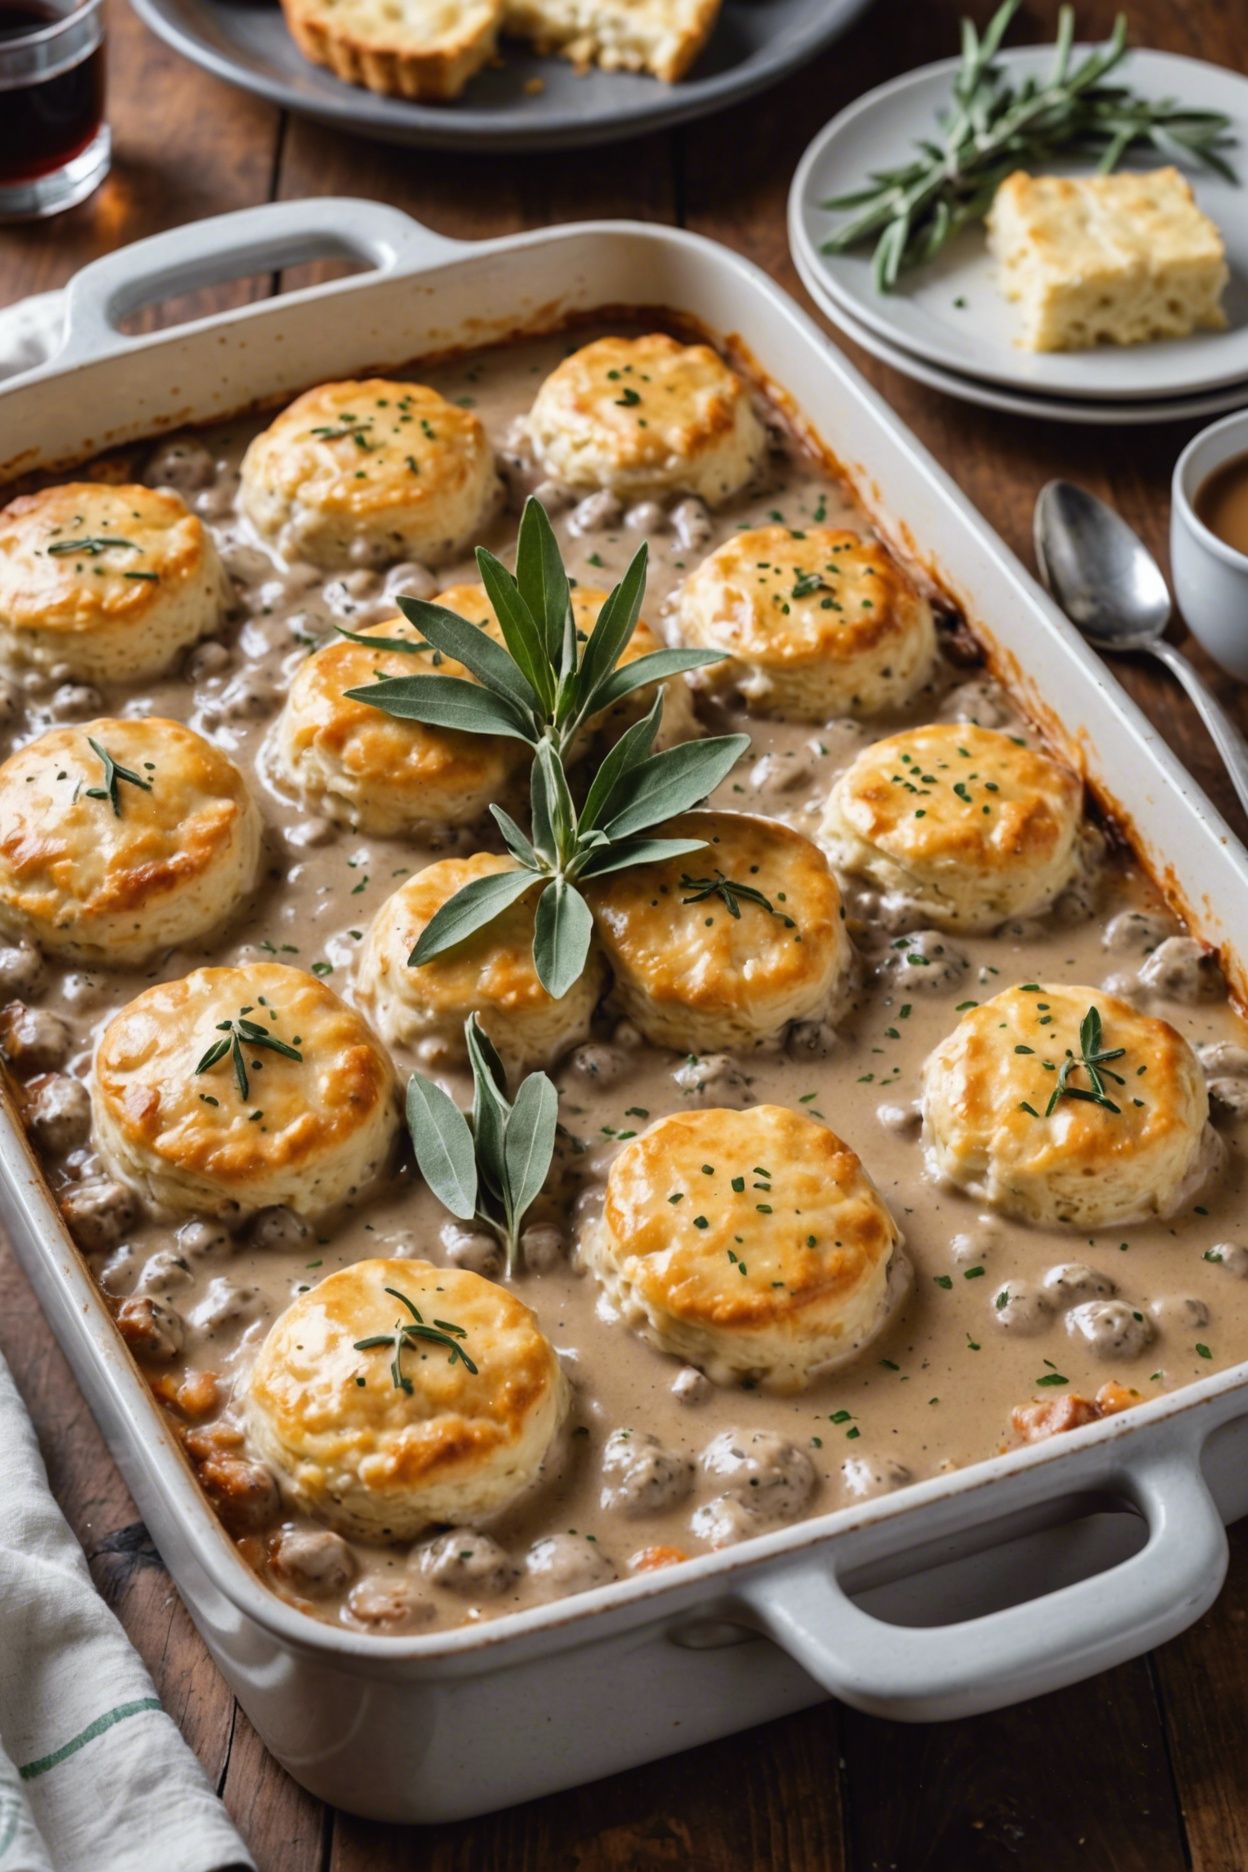 Biscuits And Gravy Casserole